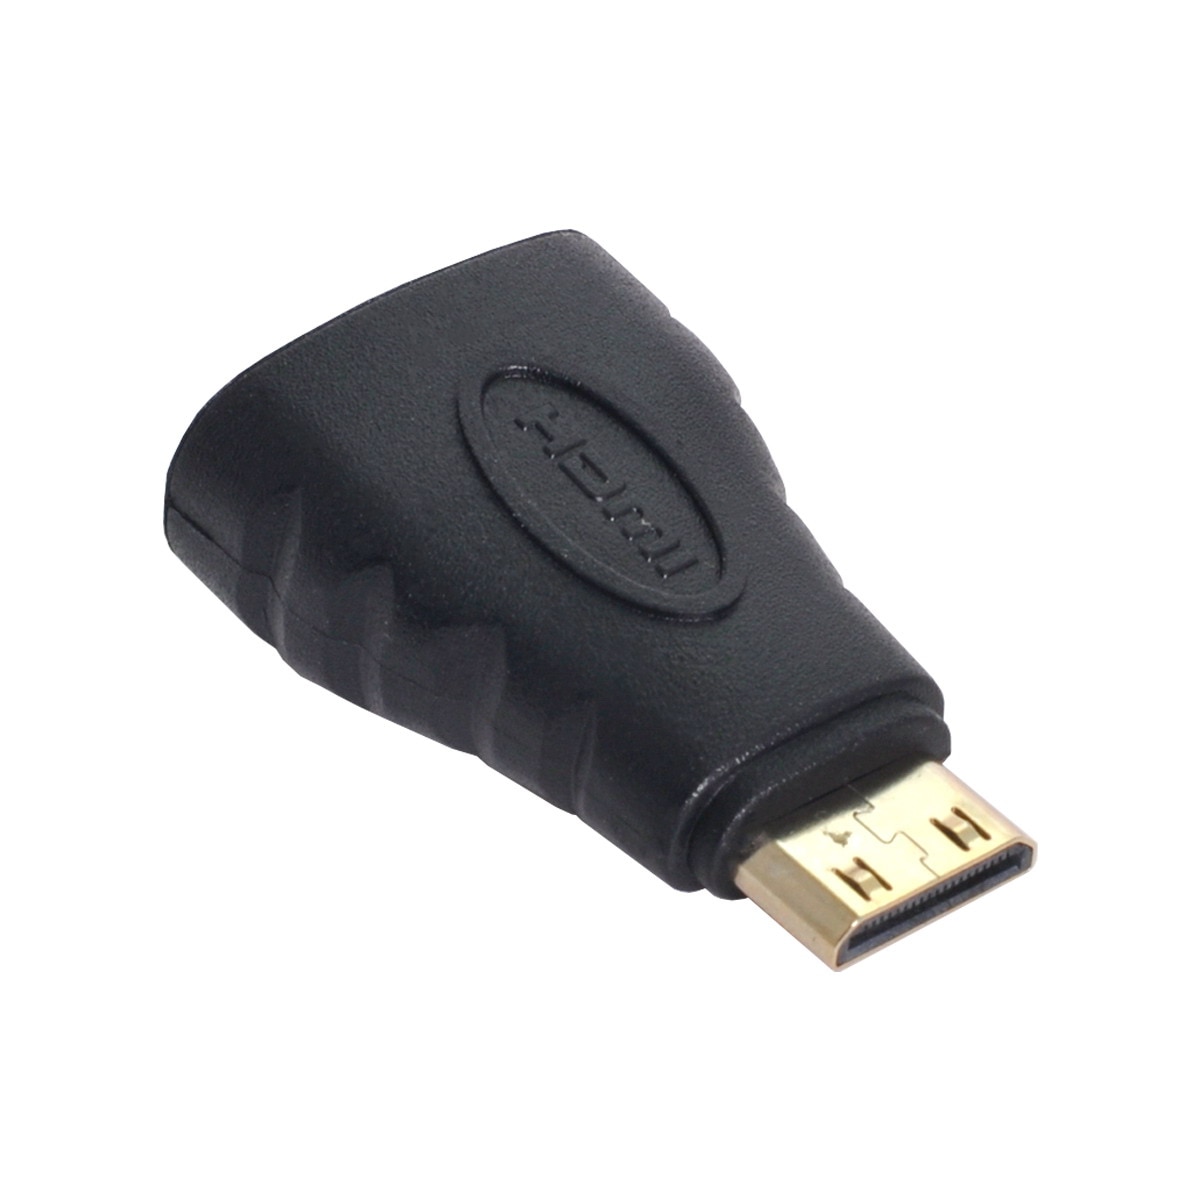 Cablecc Mini Hdmi Male Naar Hdmi Female Adapter Connector Koppeling